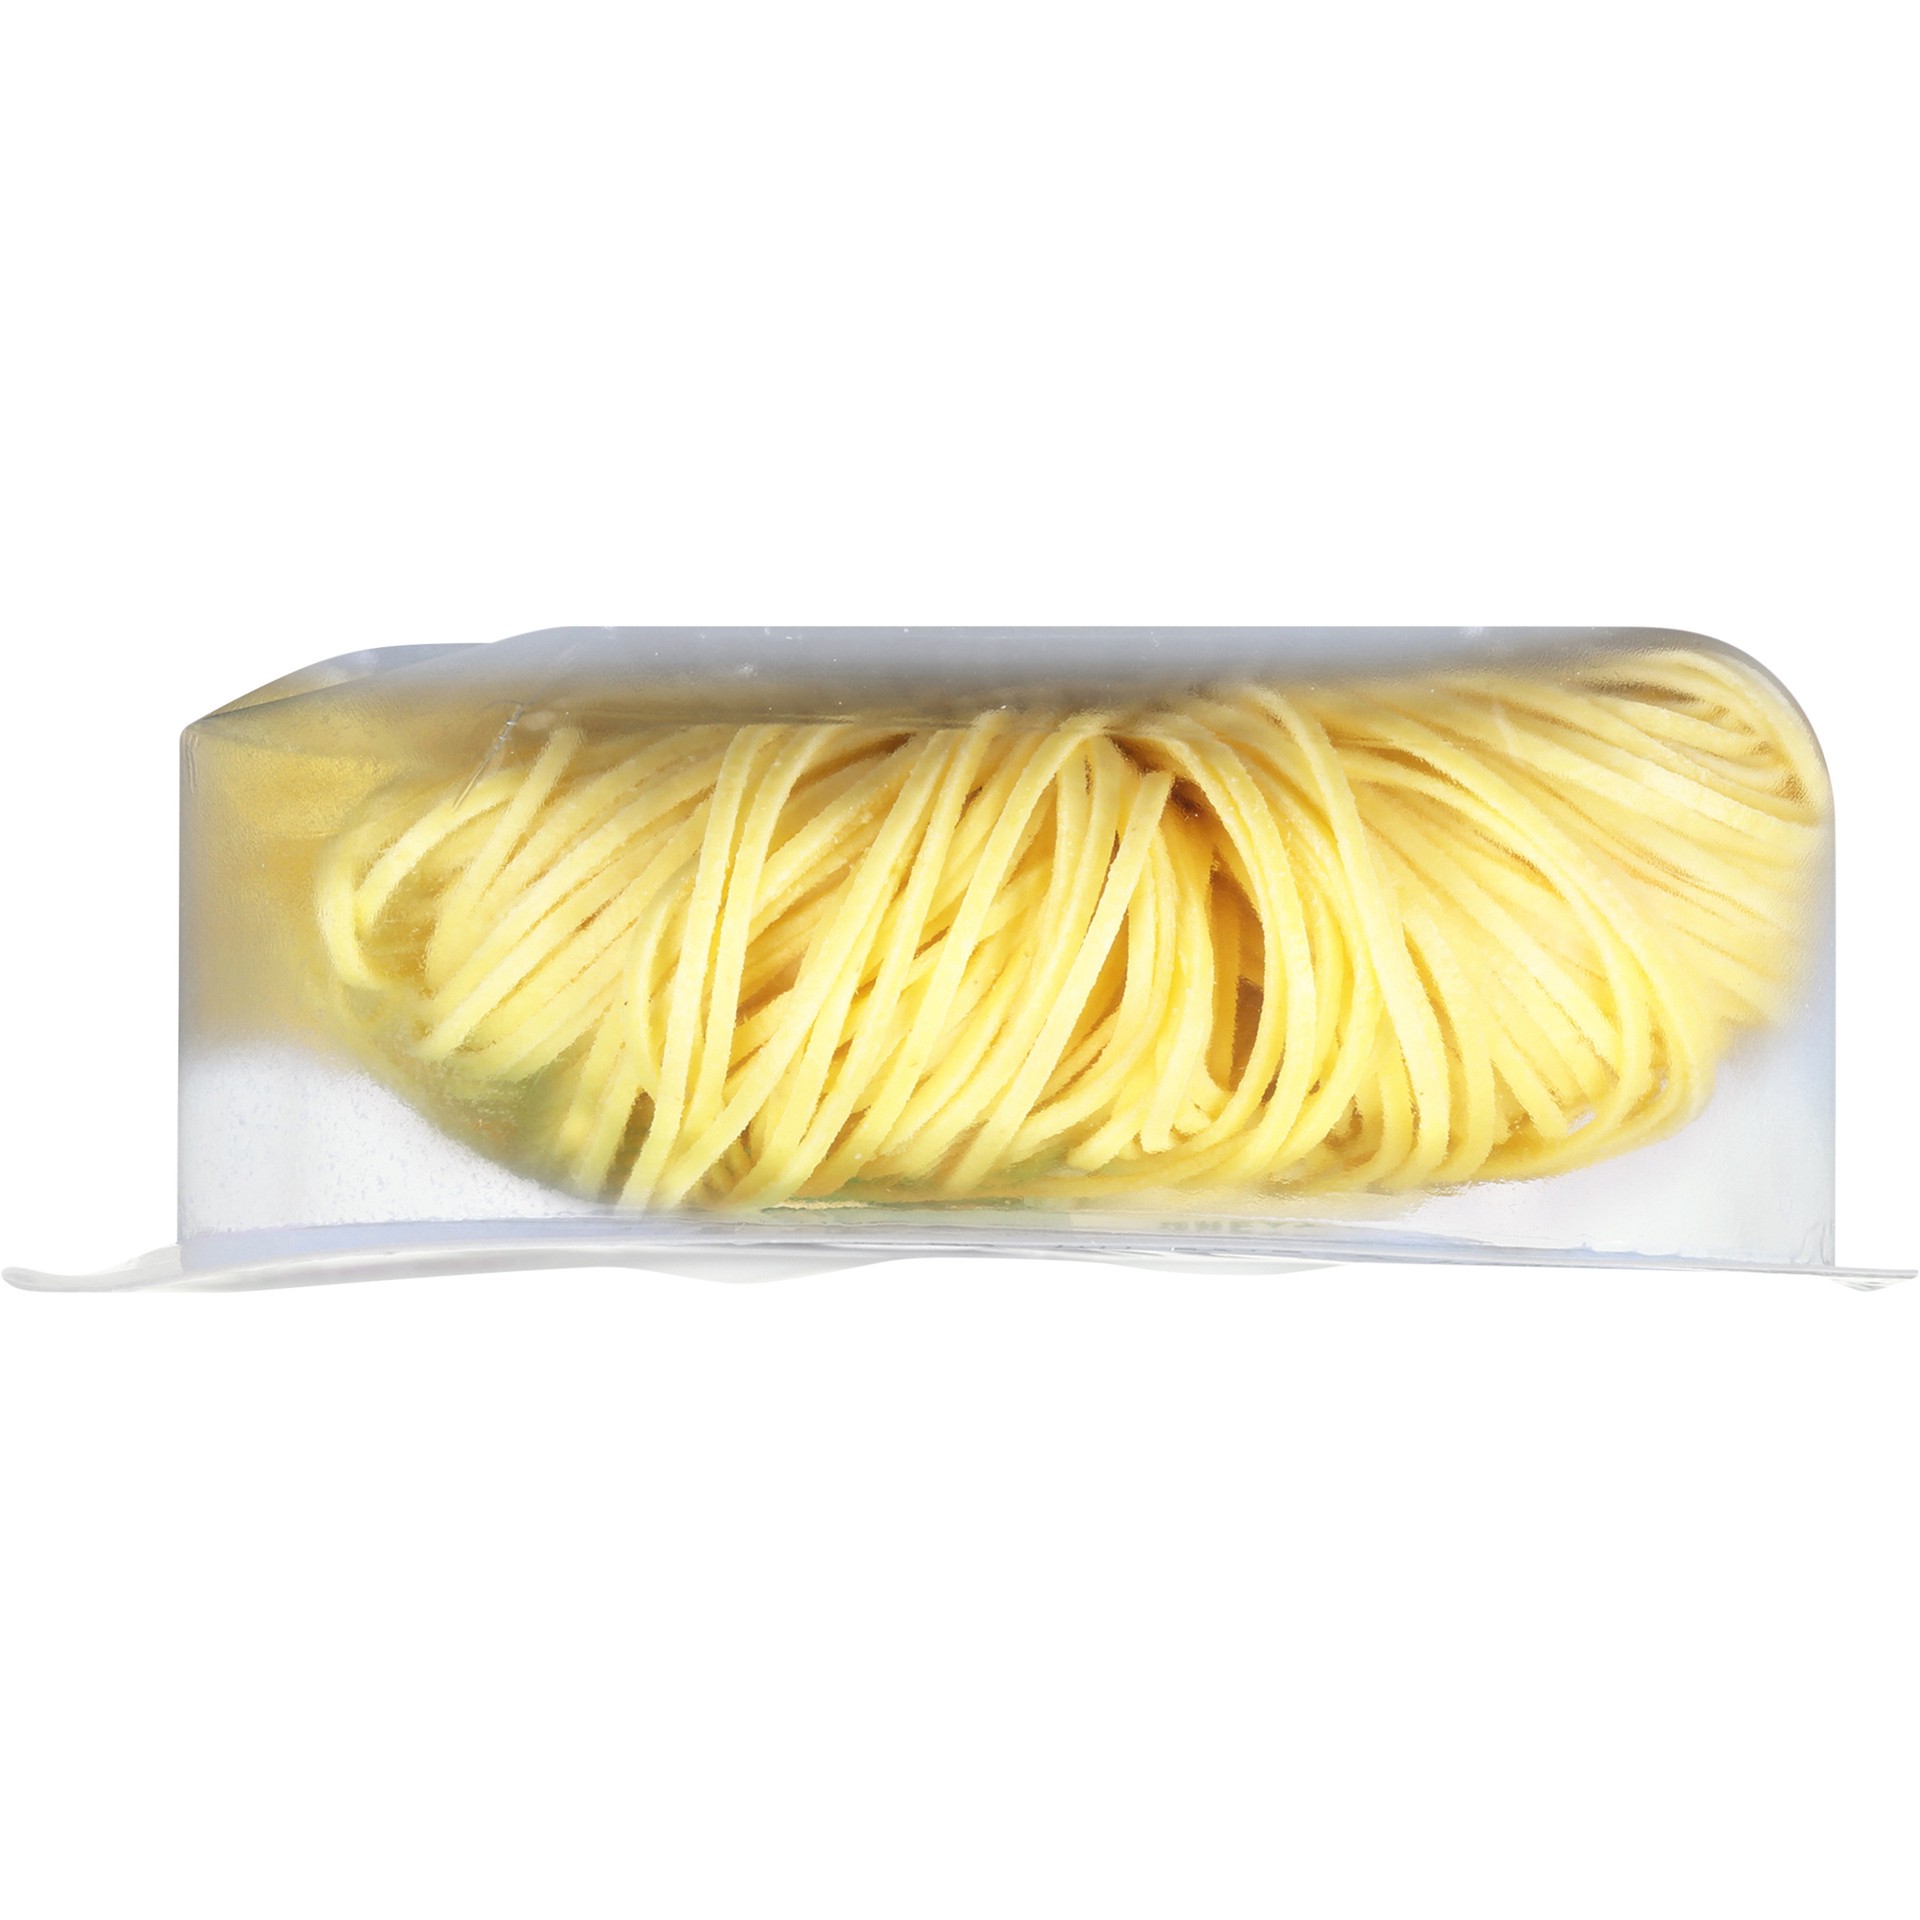 slide 10 of 10, Buitoni Angel Hair, Refrigerated Pasta Noodles, 9 oz Package, 9 oz